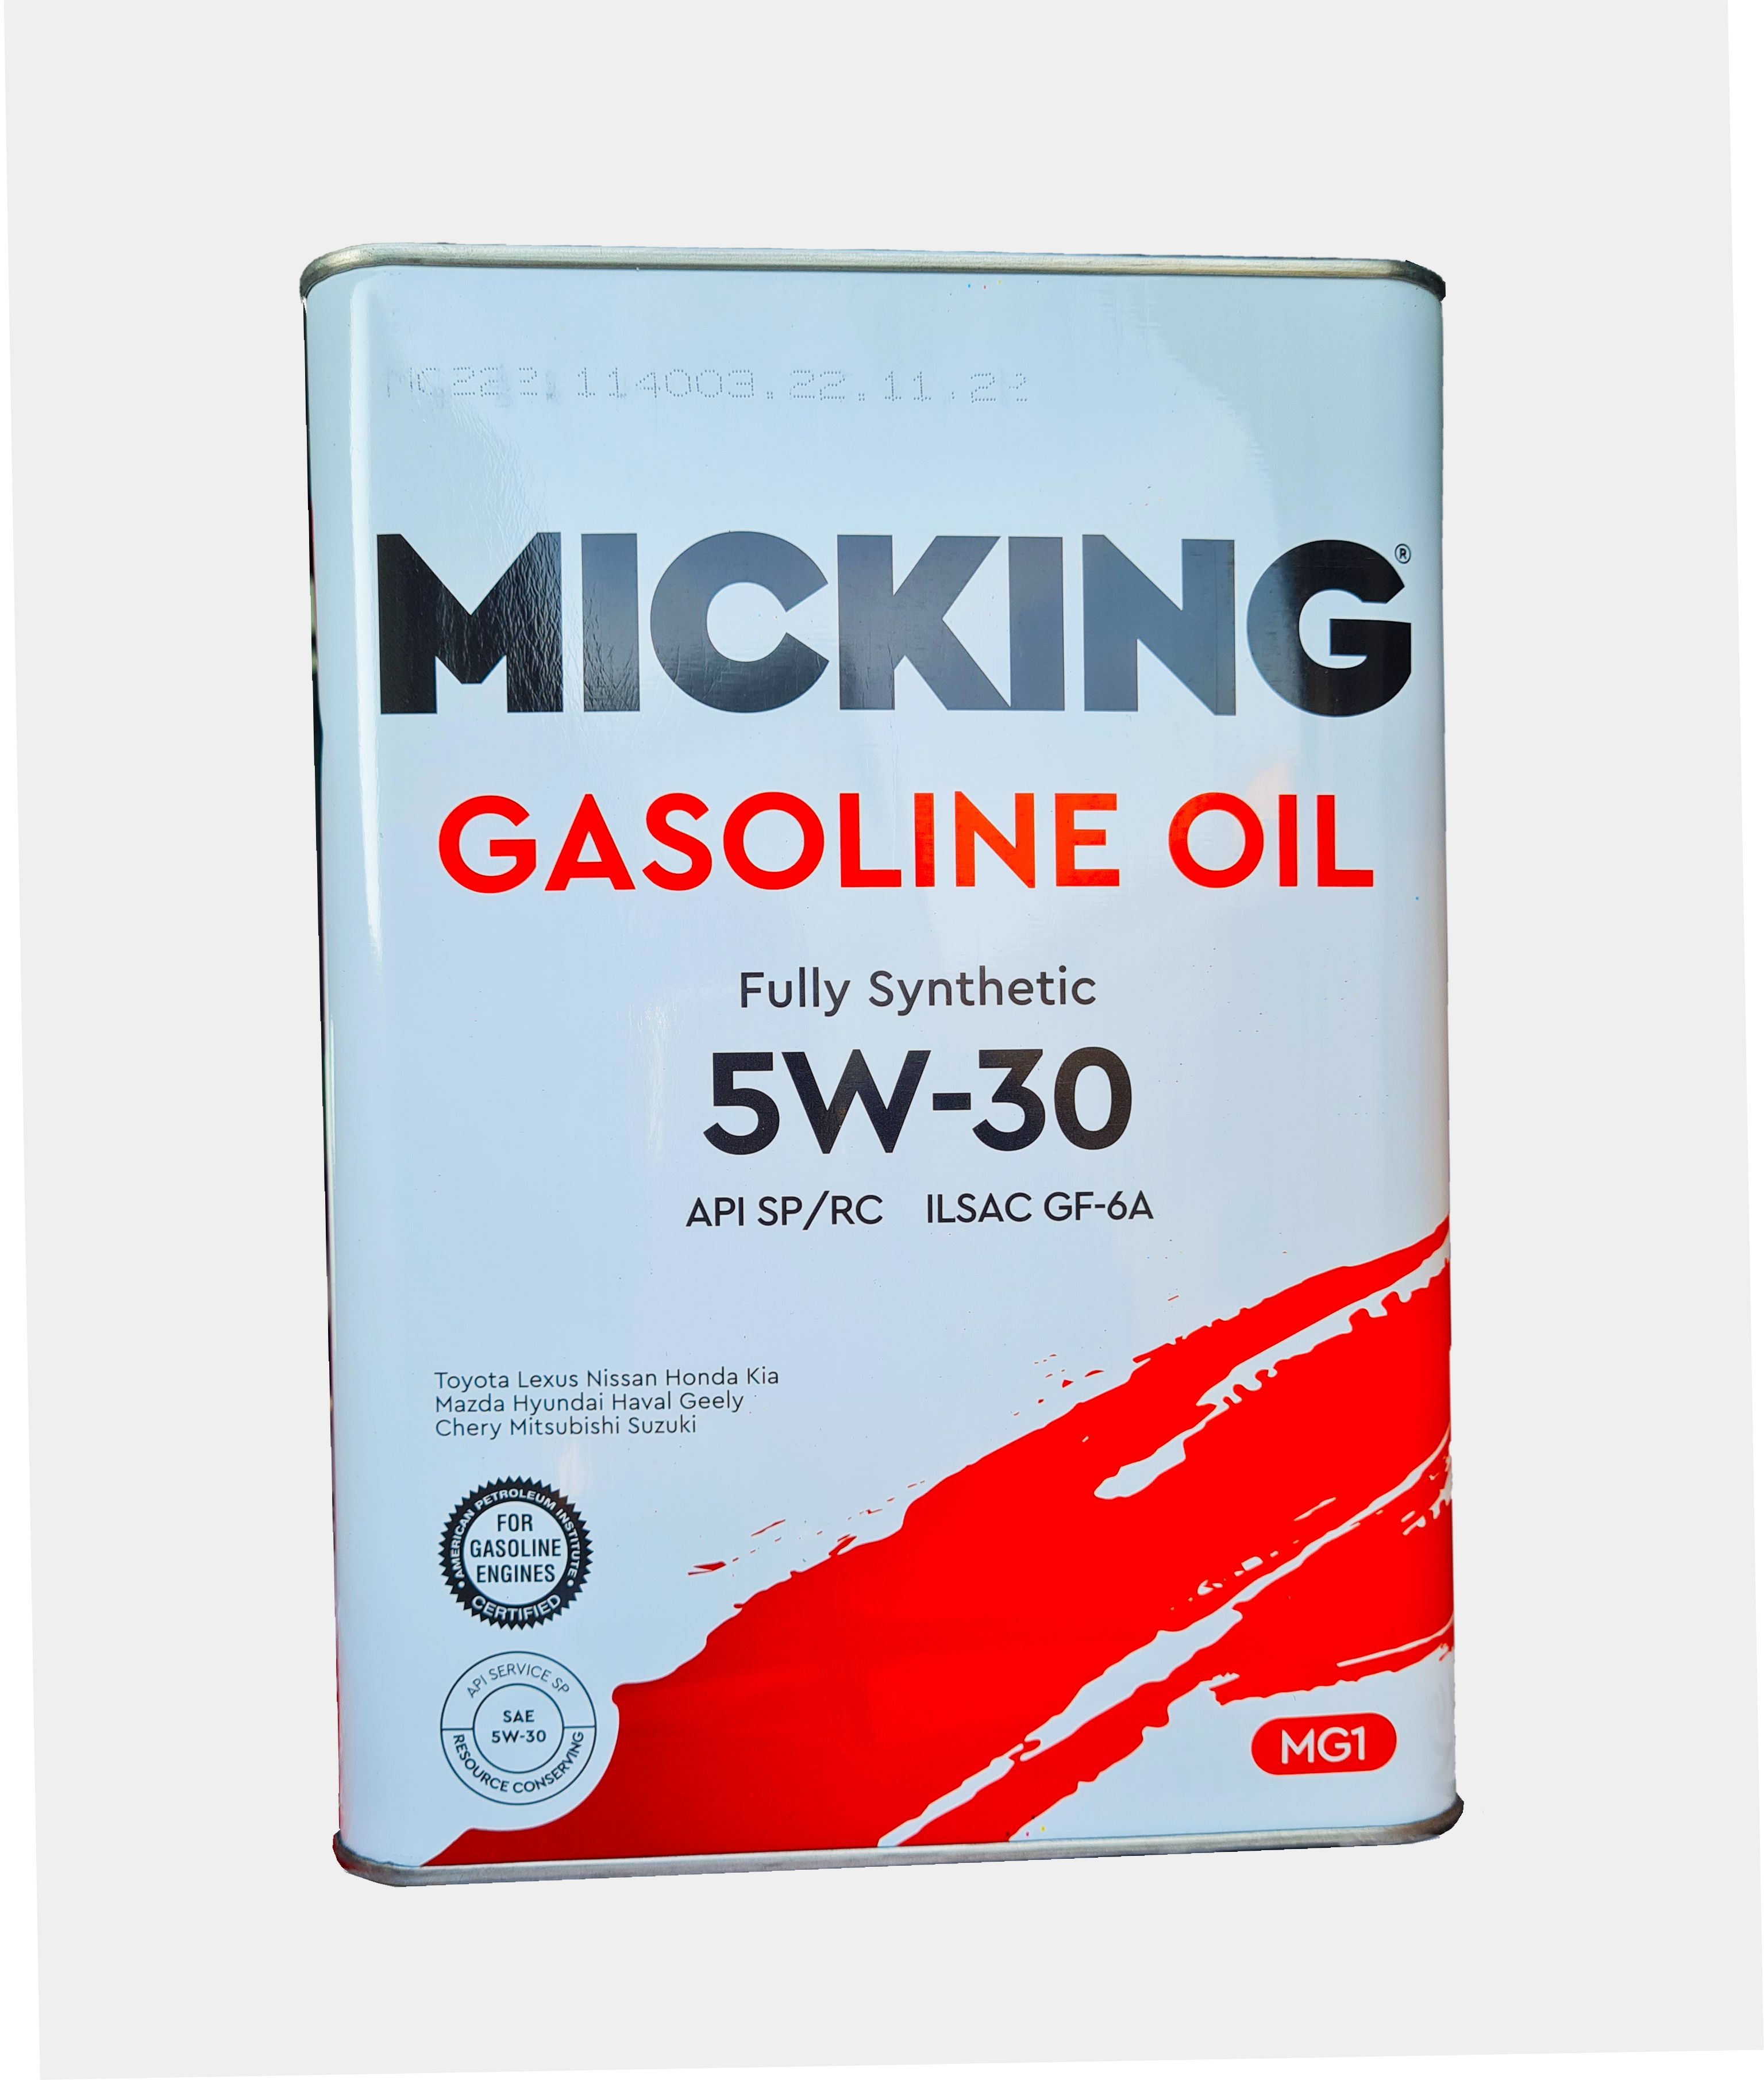 Масло моторное Micking gasoline fully-Synthetic 5w-30 синтетическое 4 л. Micking 5w30 моторное масло. Моторное масло TCL 0w20.